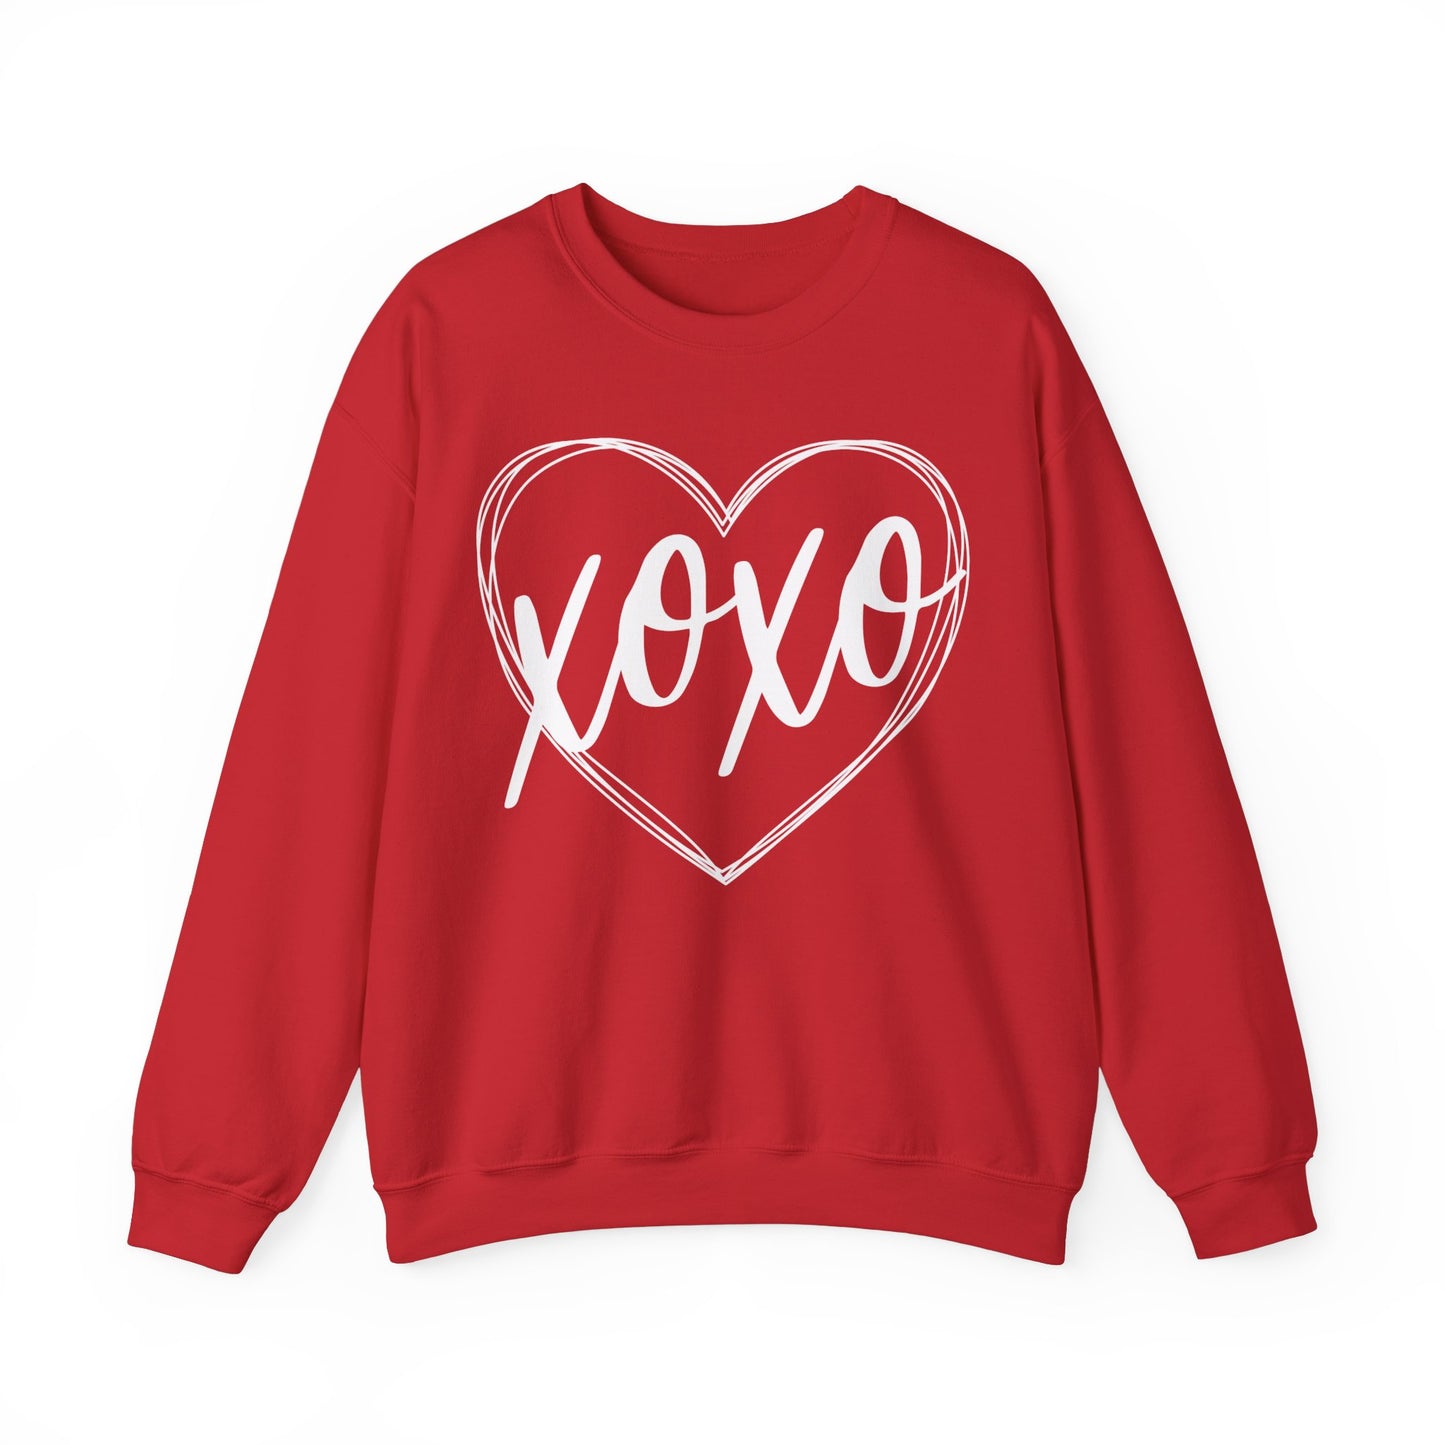 XOXO Heart Valentines Day Sweatshirt, Valentine Shirts for women and girls, Valentines Day Gifts for Mom